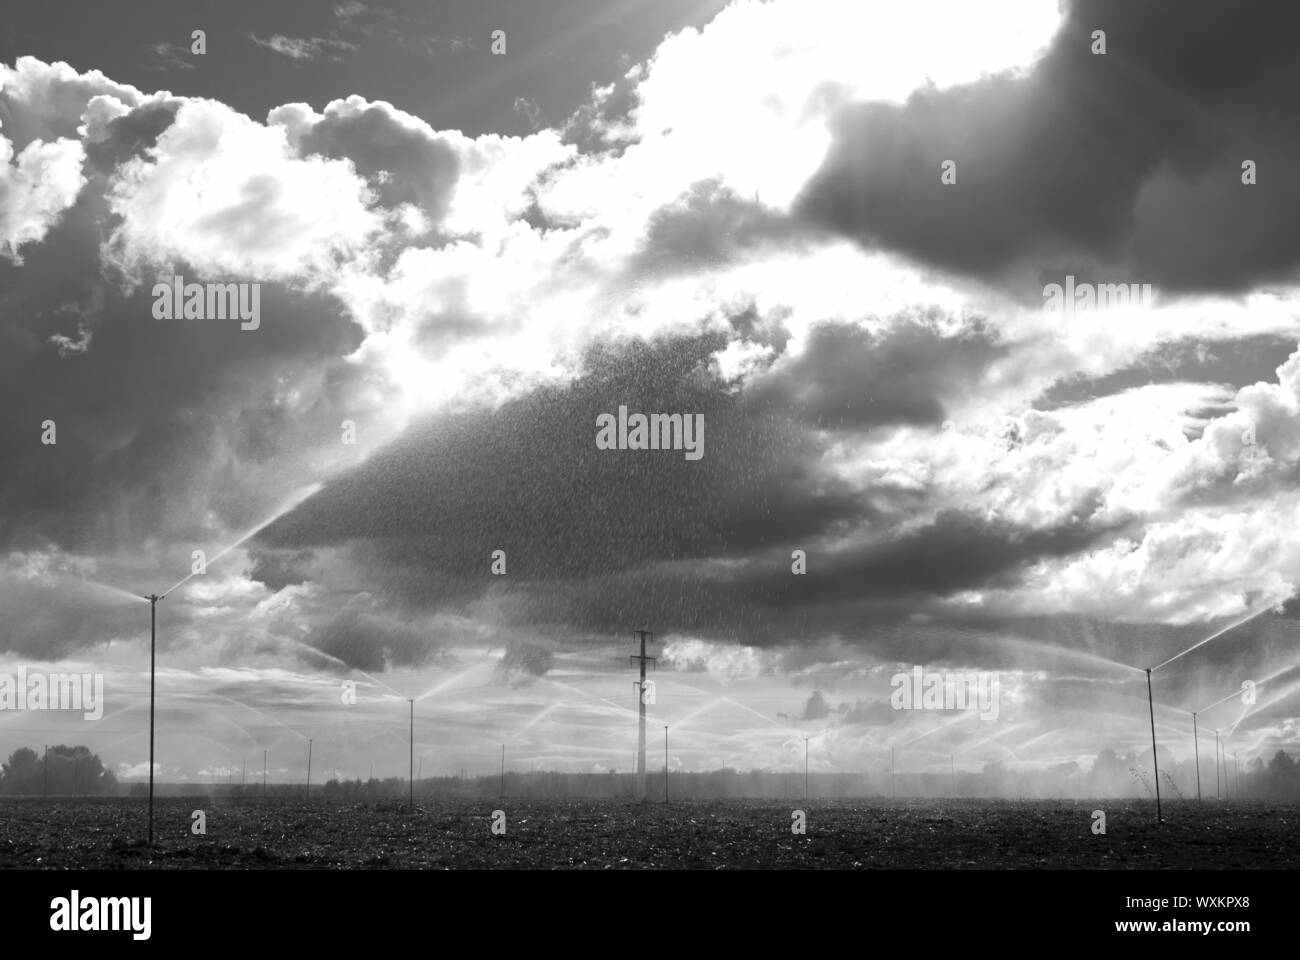 Field with sprinklers watering the sowing in a day with cloudy sky. Storm. Stock Photo